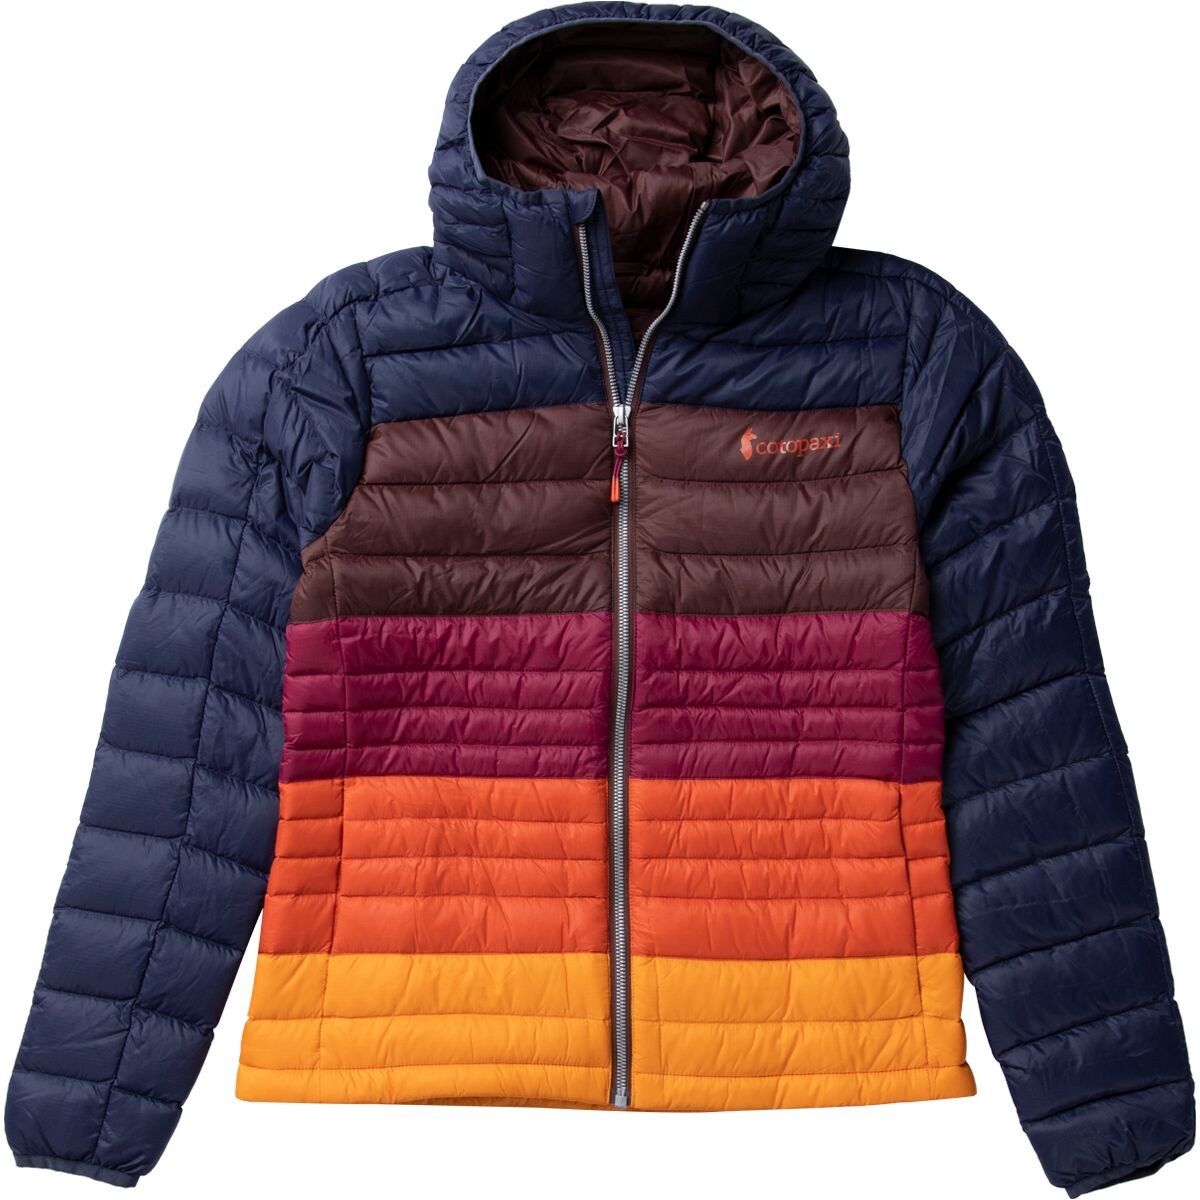 Cotopaxi Fuego Colorblock Down Hooded Jacket - Women's